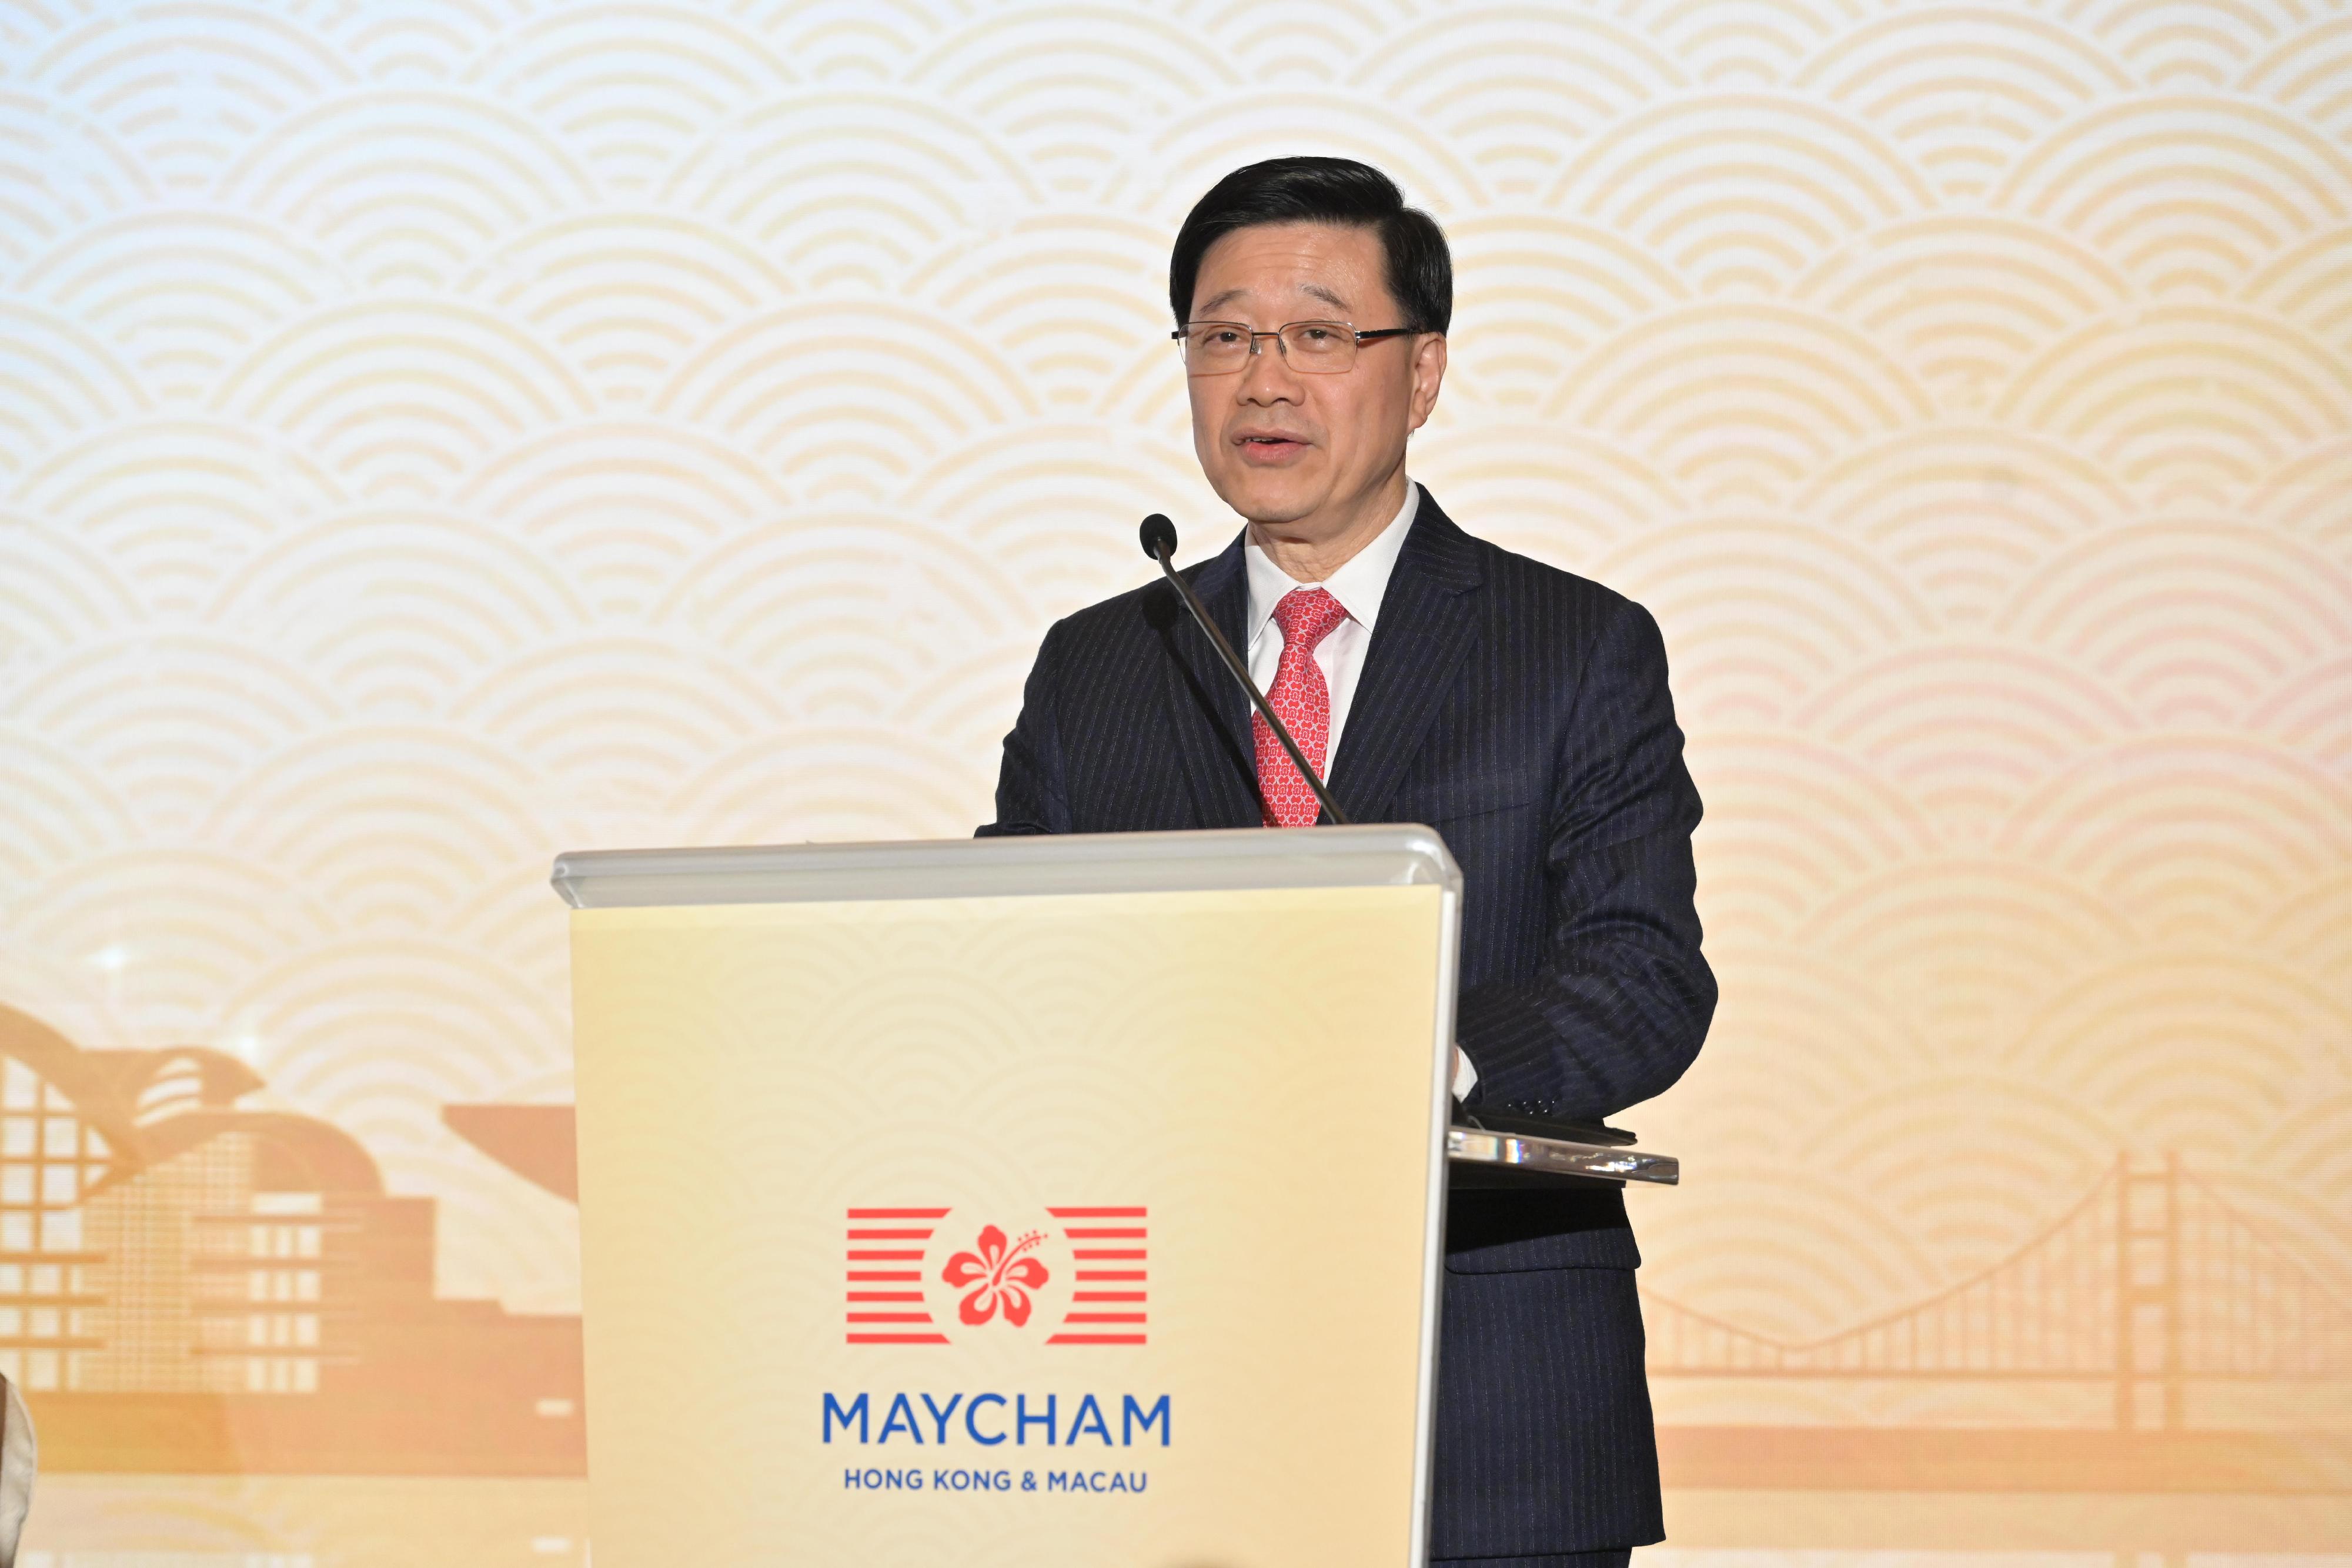 The Chief Executive, Mr John Lee, speaks at the Malaysian Chamber of Commerce Hong Kong & Macau 10th Anniversary Cocktail Reception today (January 25).